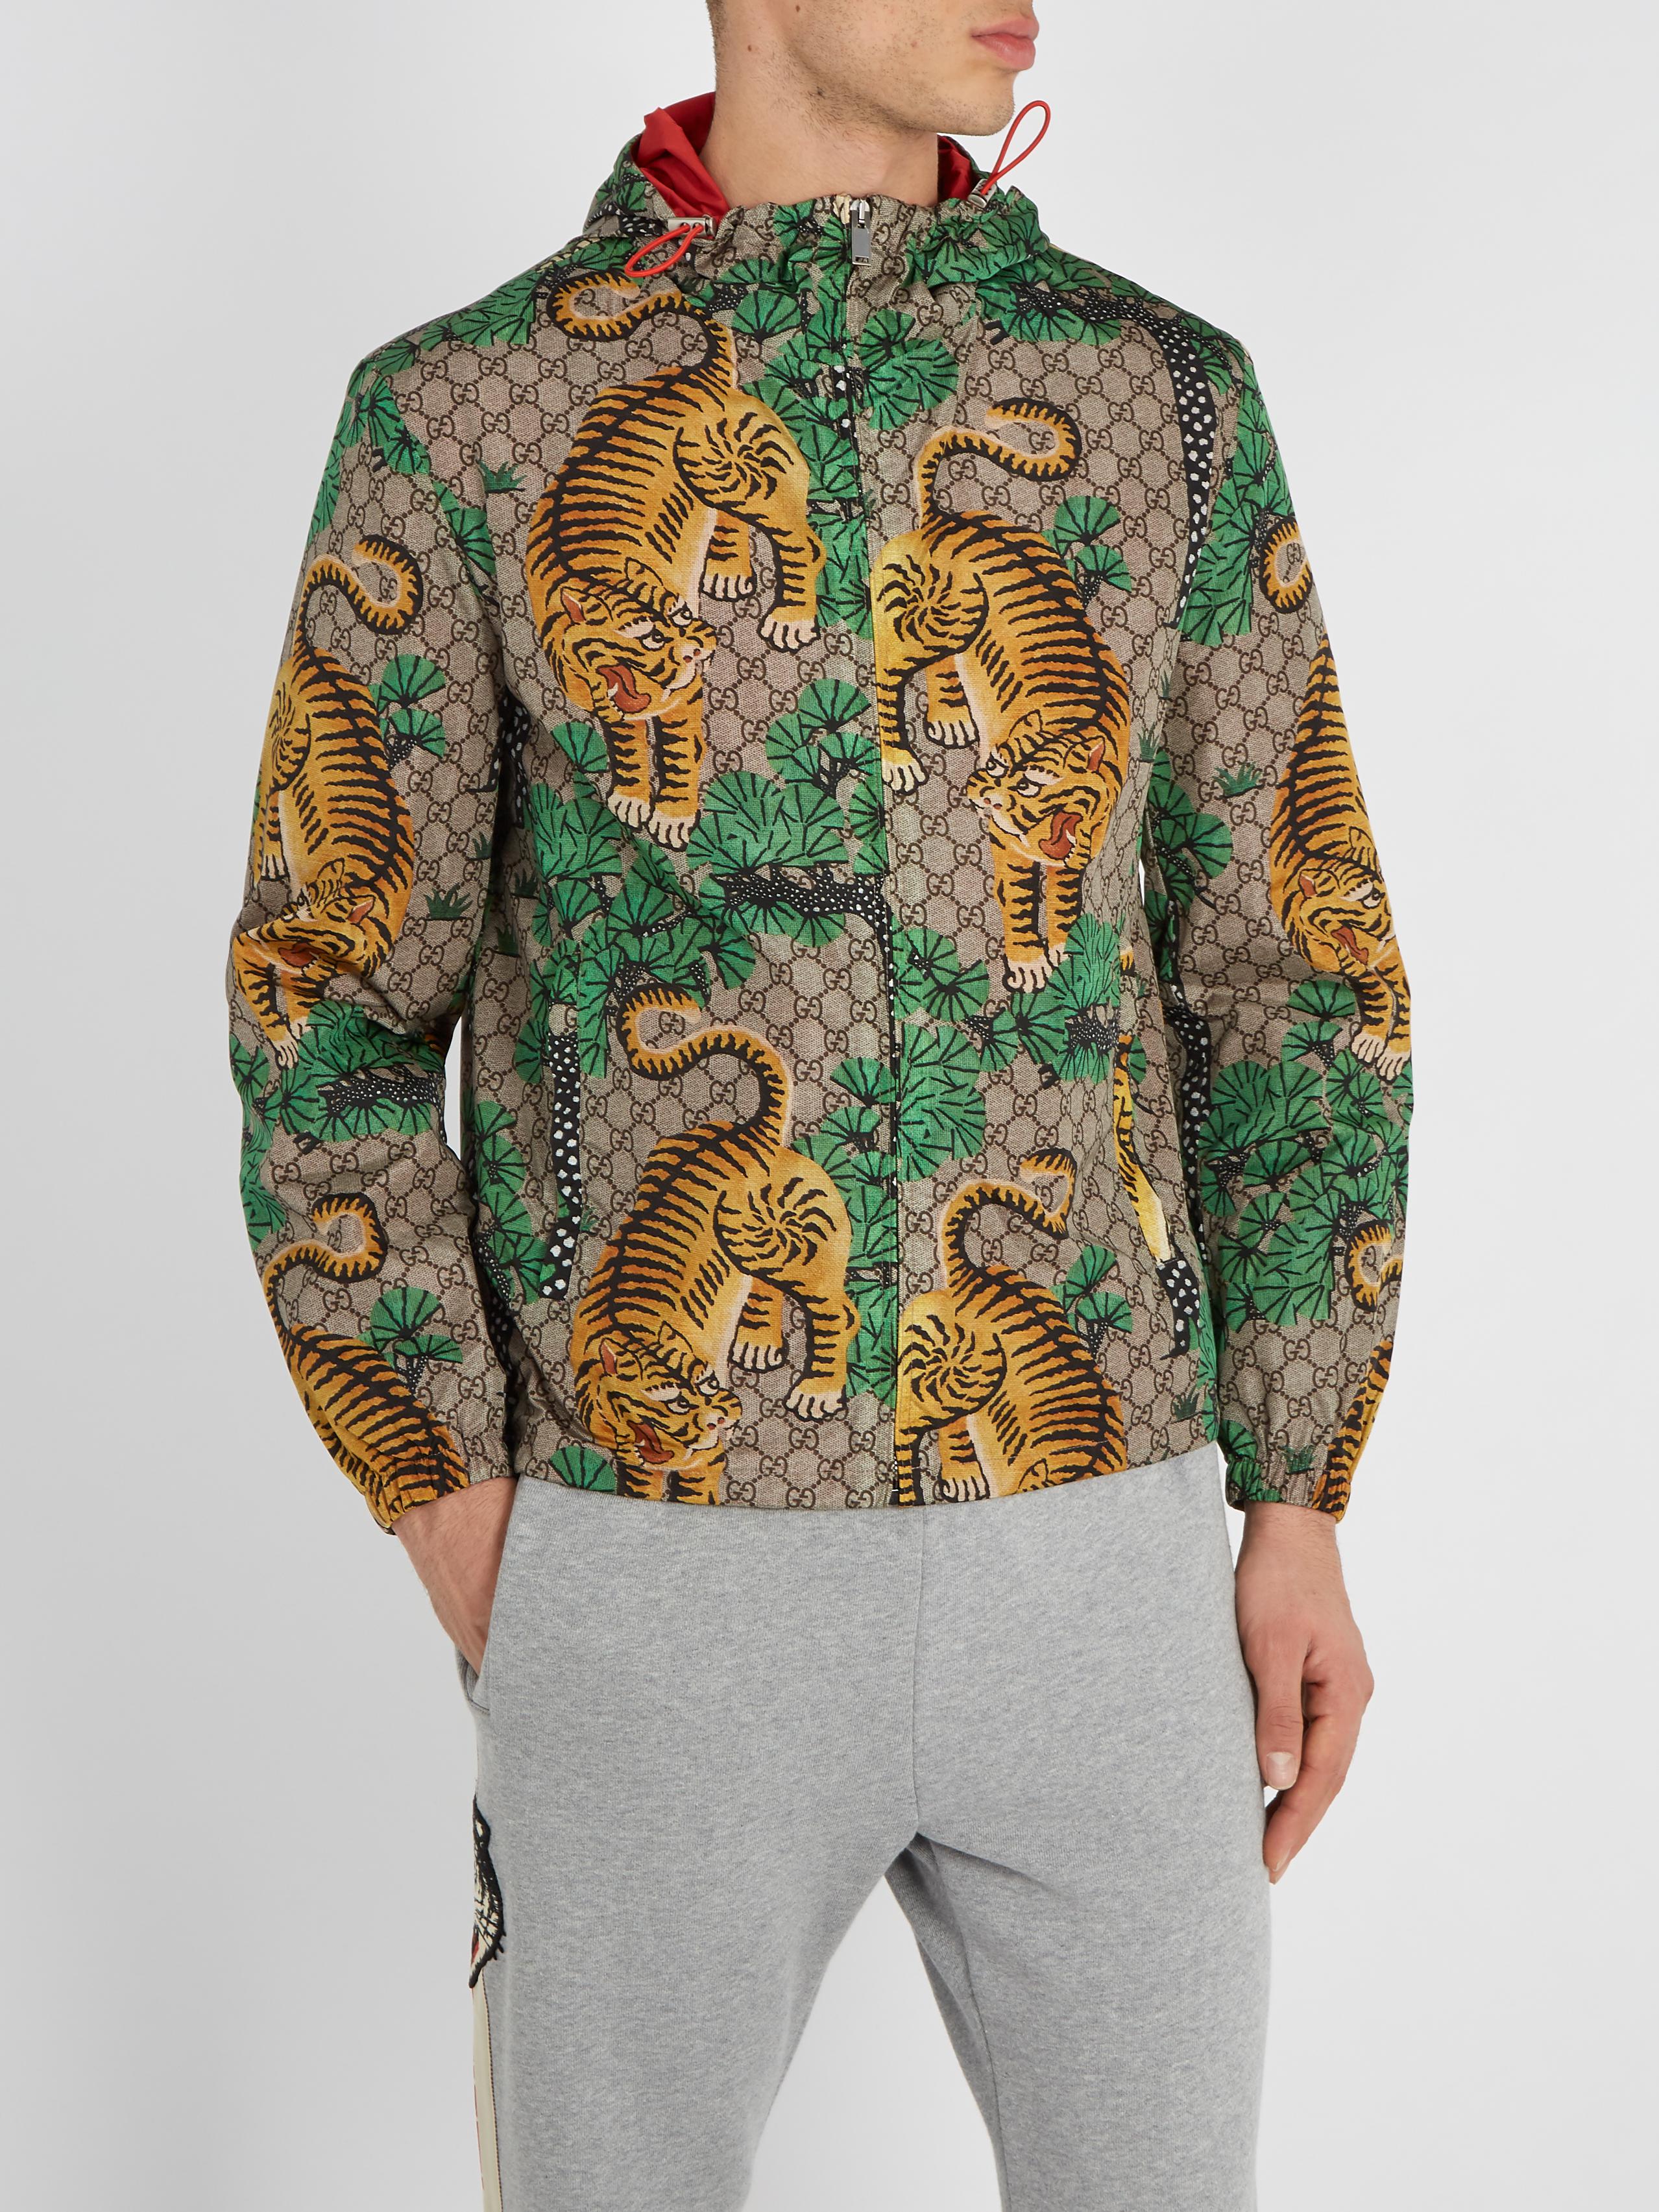 Gucci Bengal Tiger Print Jacket in Green for Men | Lyst UK